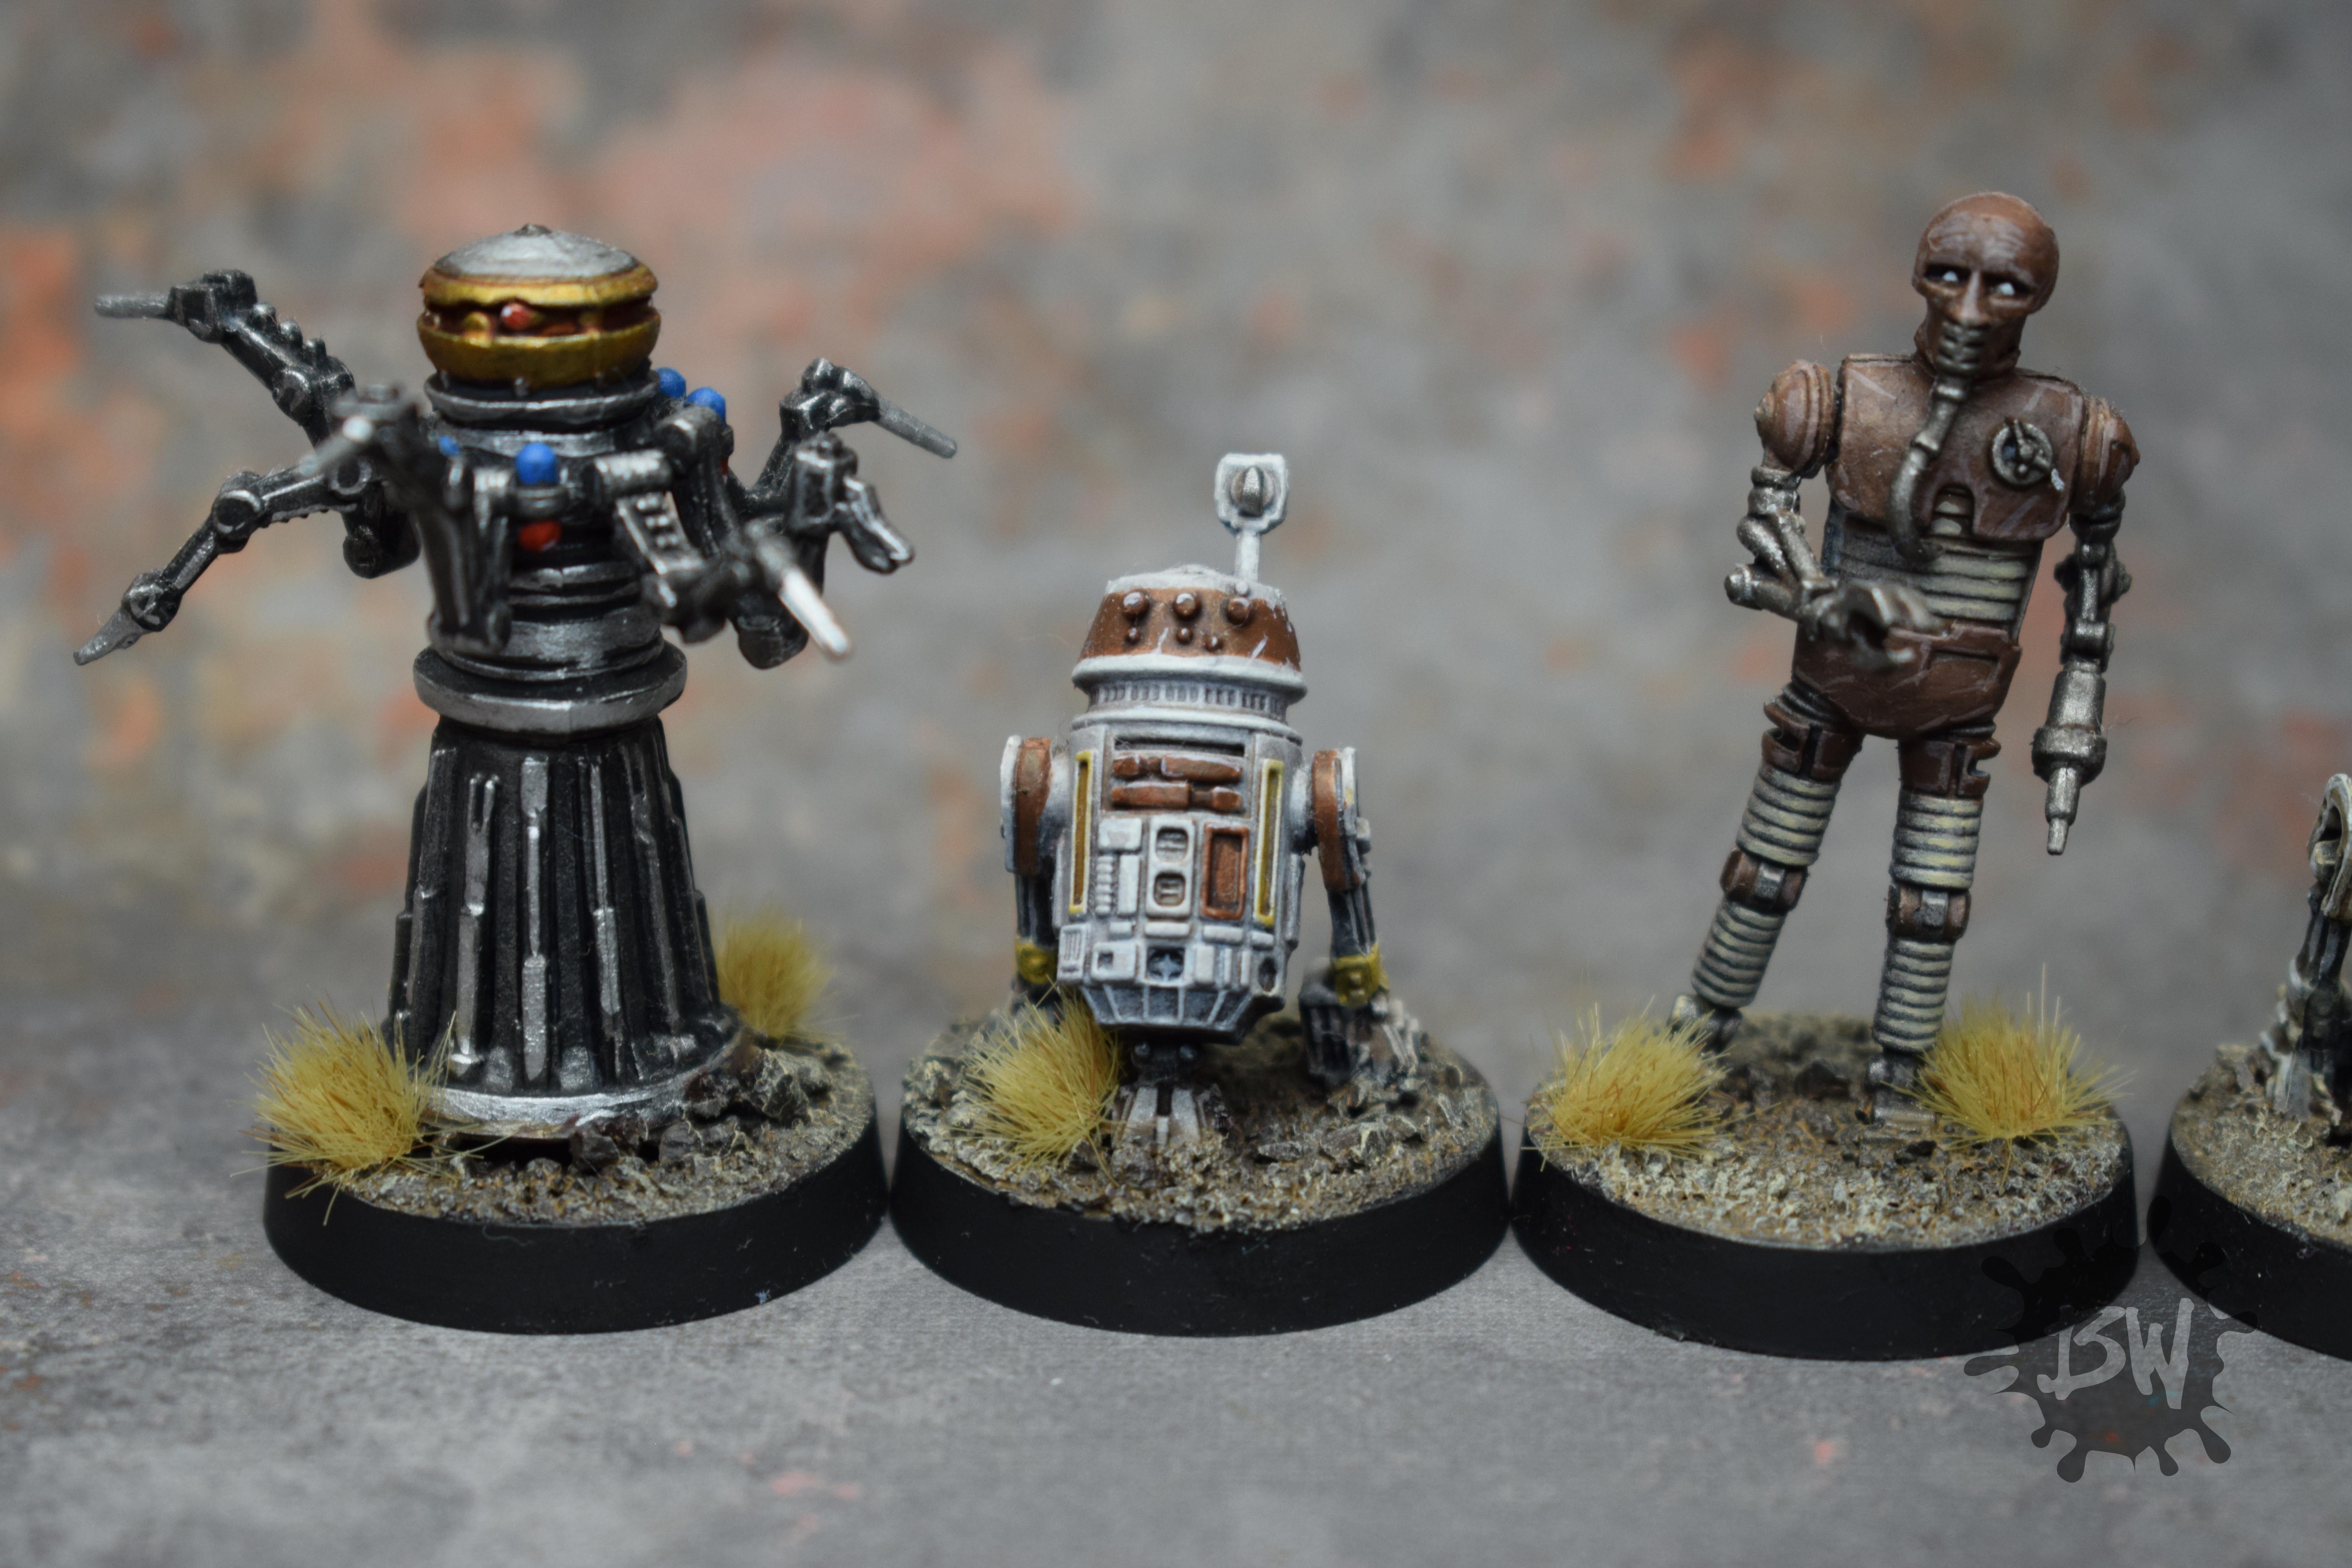 Amg, Army, Atomic Mass Games, Bw, Droid, Medical Droids And Astromech Droids, Robot, Star Wars Legion, Swl